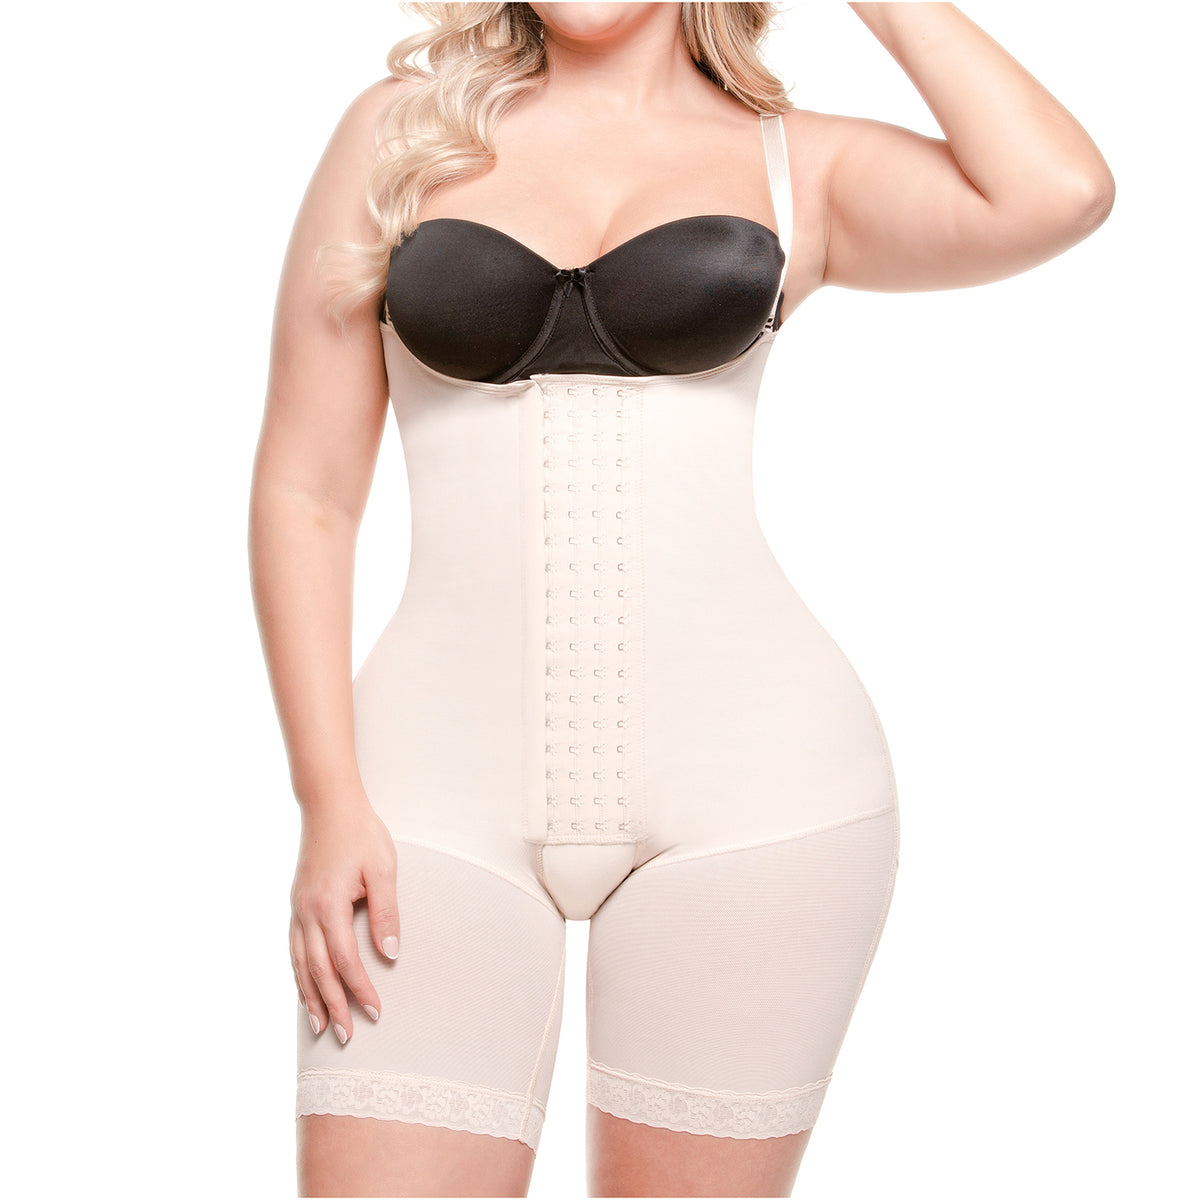 Post-Surgery BBL, Open-Bust, Mid-Back, High Compression Shapewear